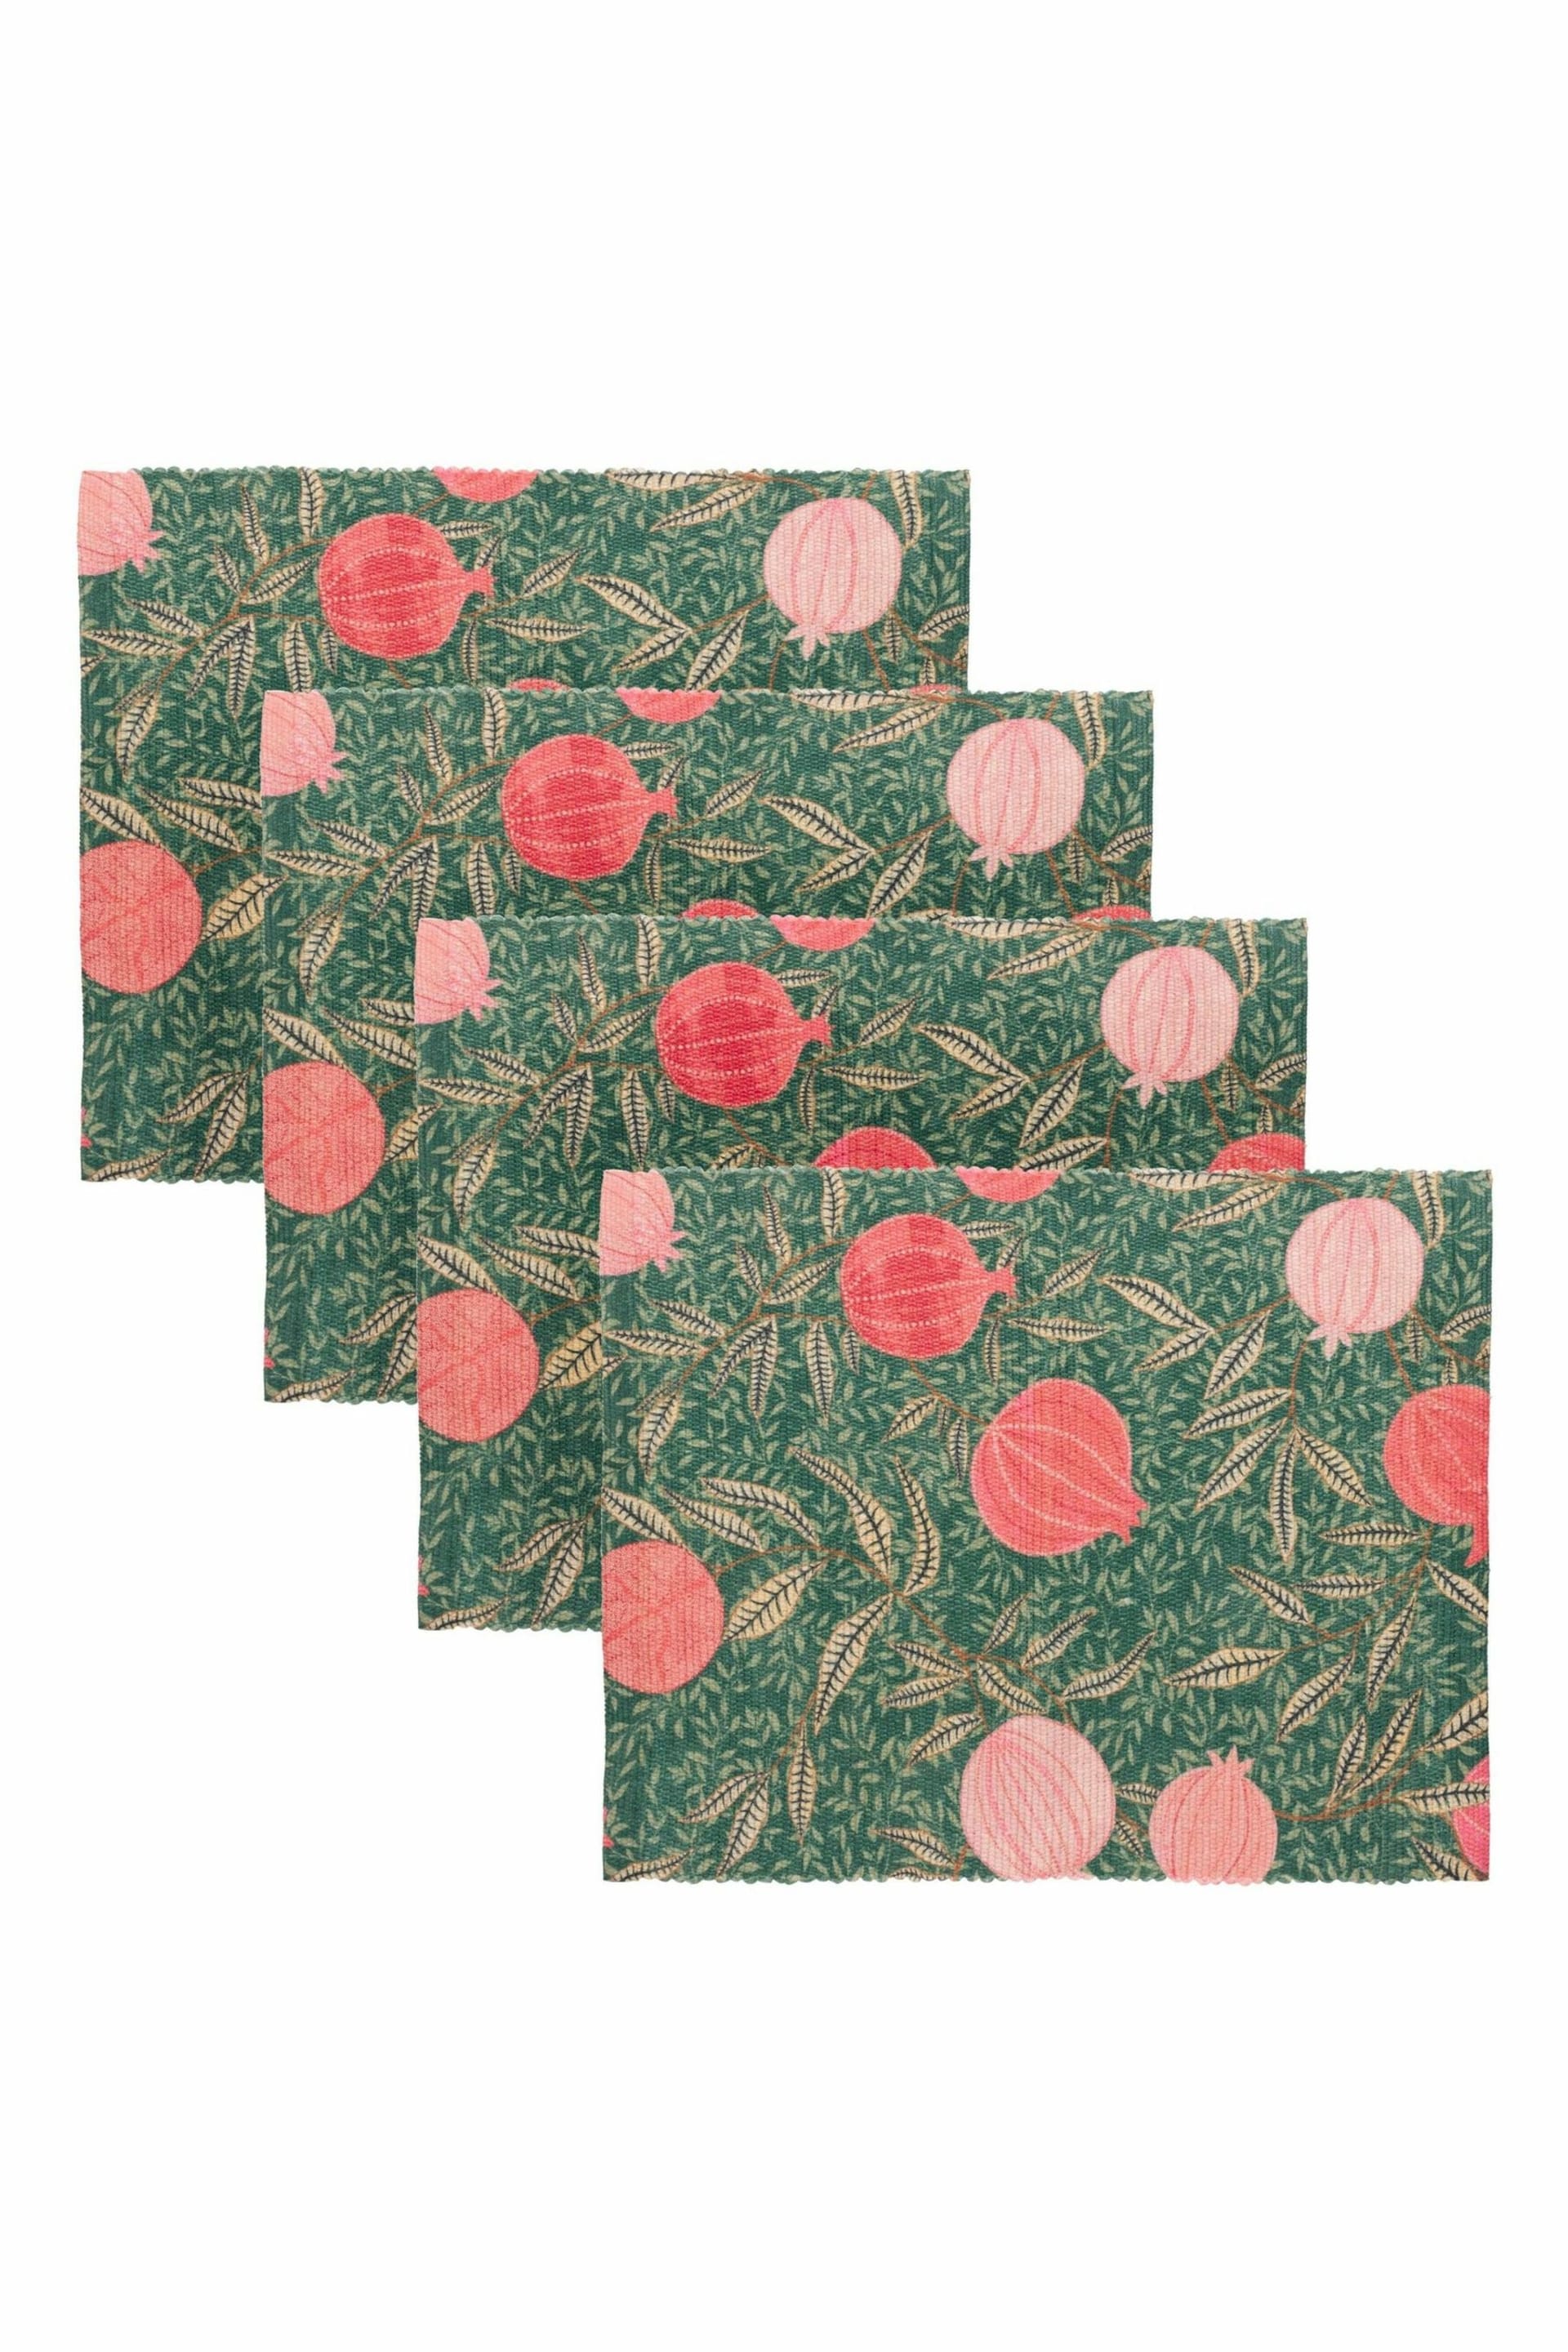 Paoletti Set of 4 Green Pomegranate Table Placemats - Image 4 of 6